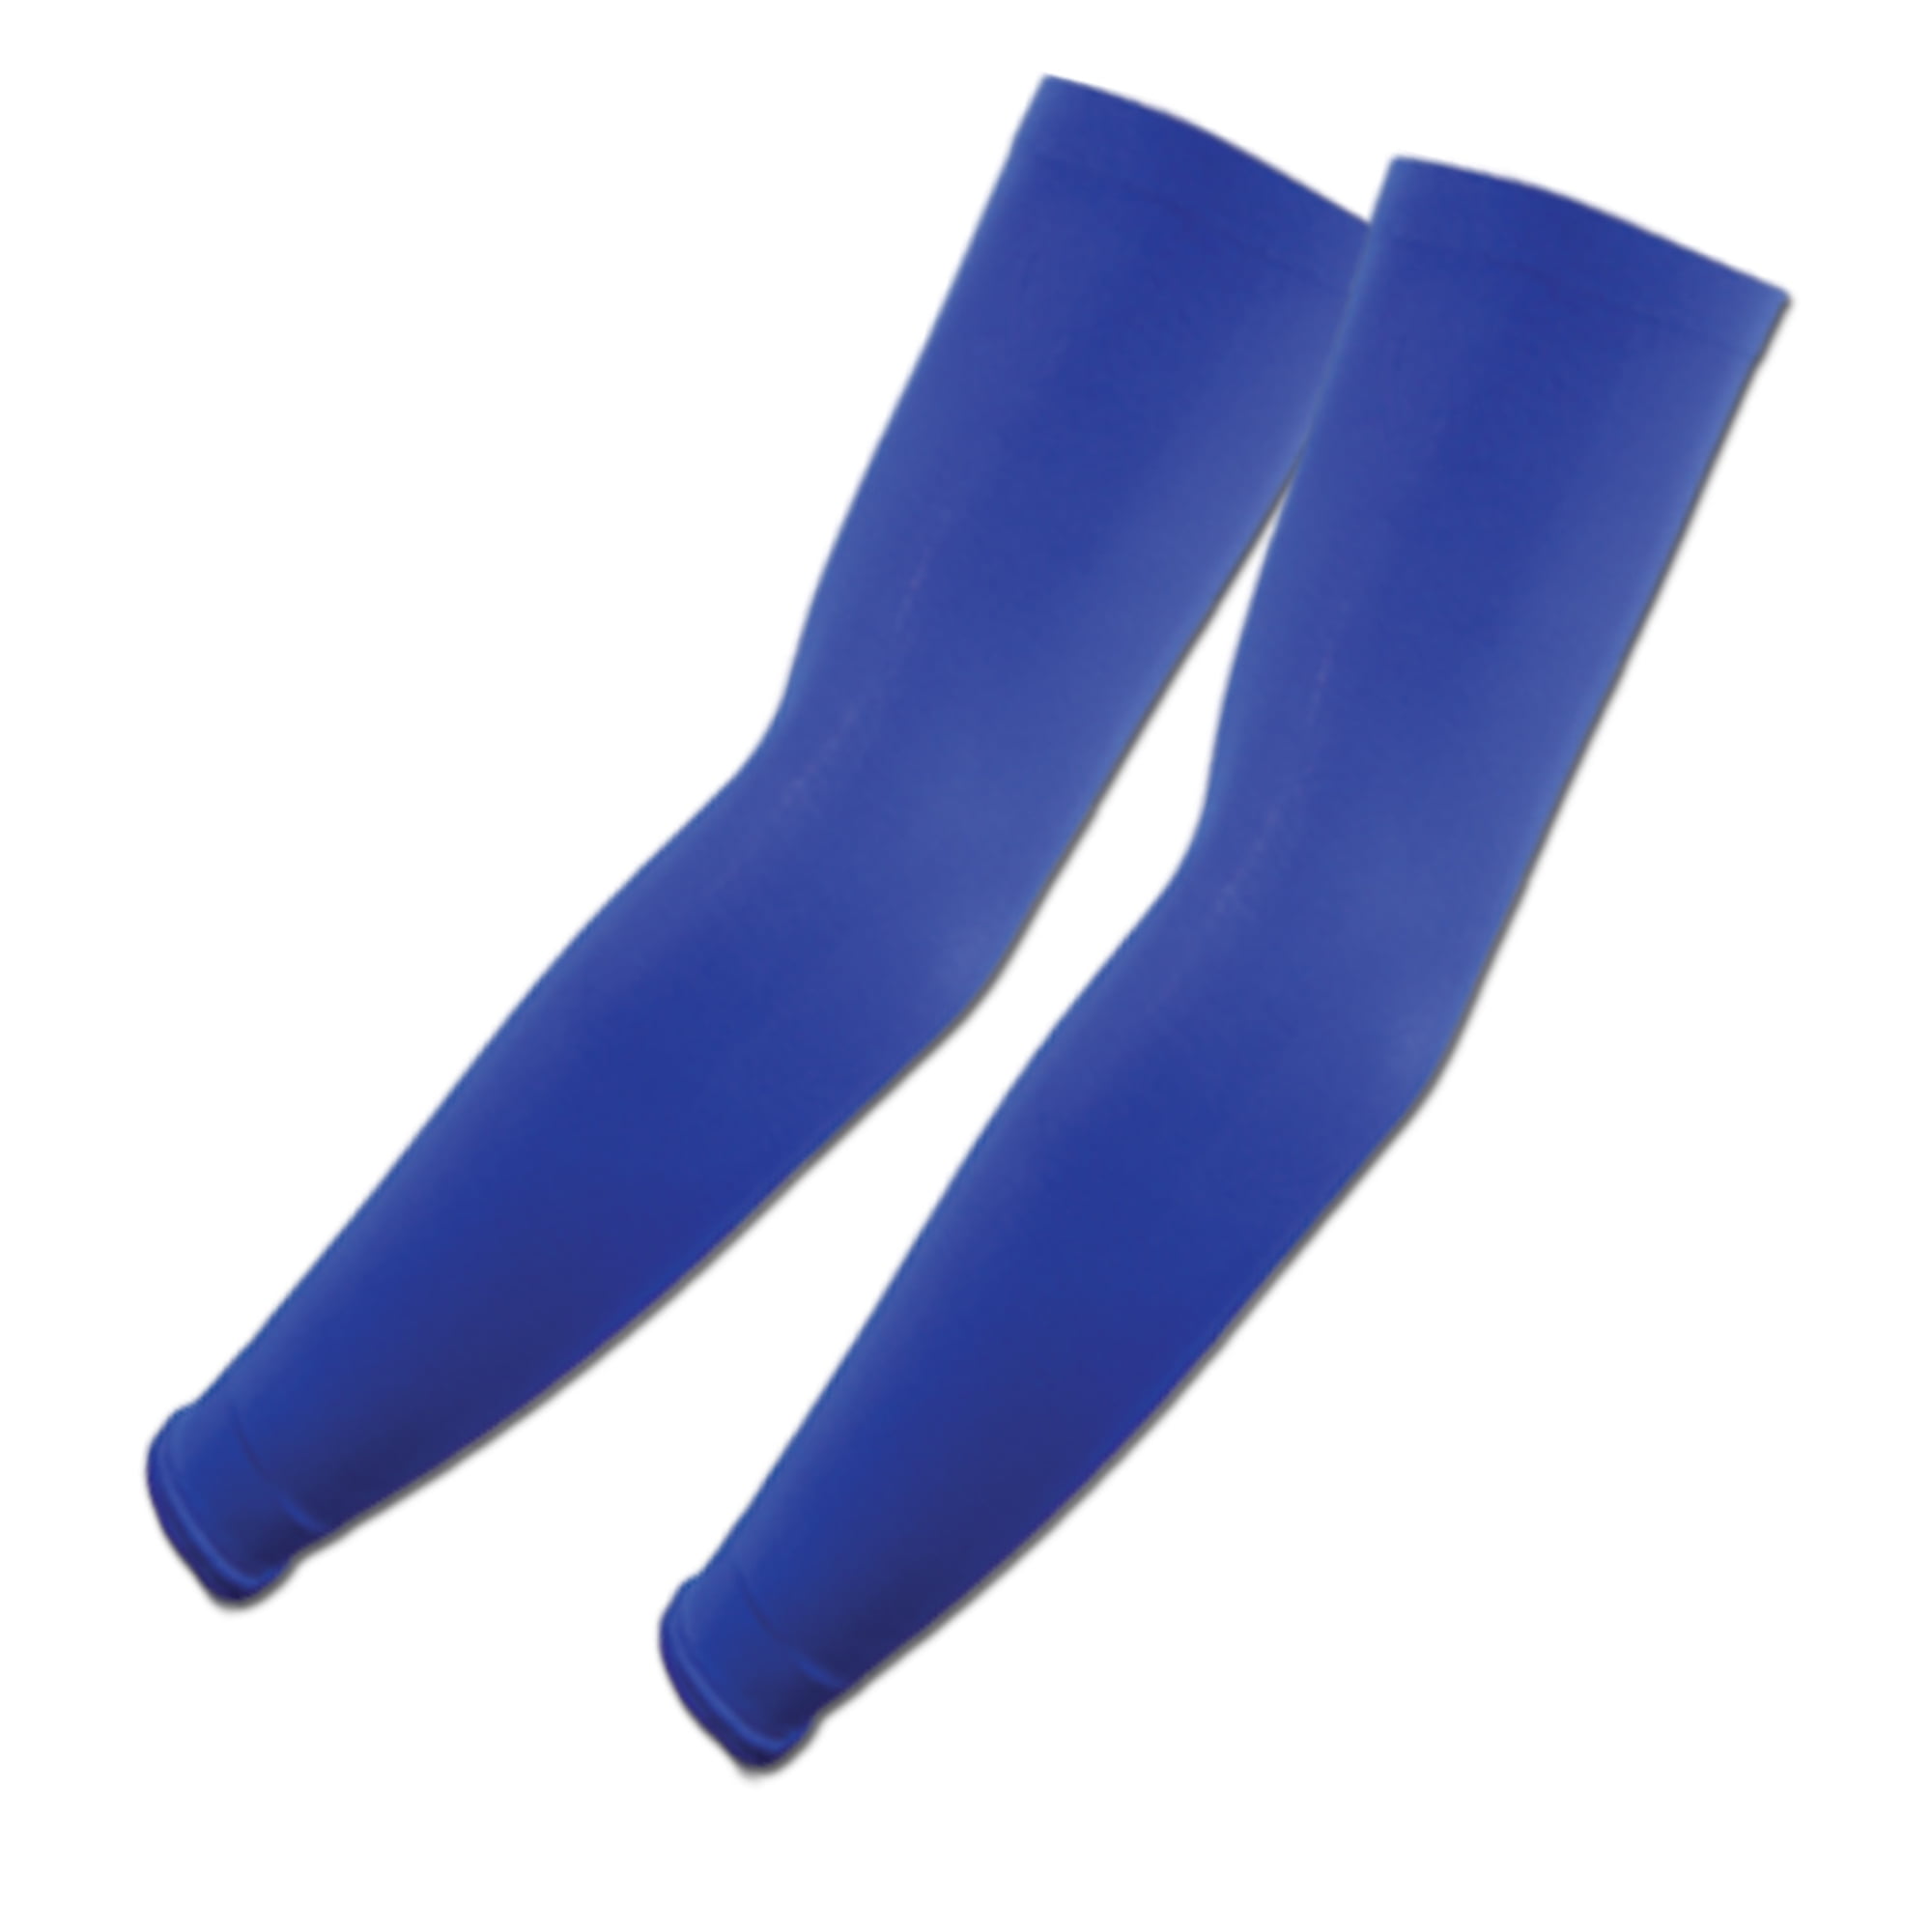 COMPRESSION ARM SLEEVE ● Blue with White Stripe Elite UV PROTECTANT 